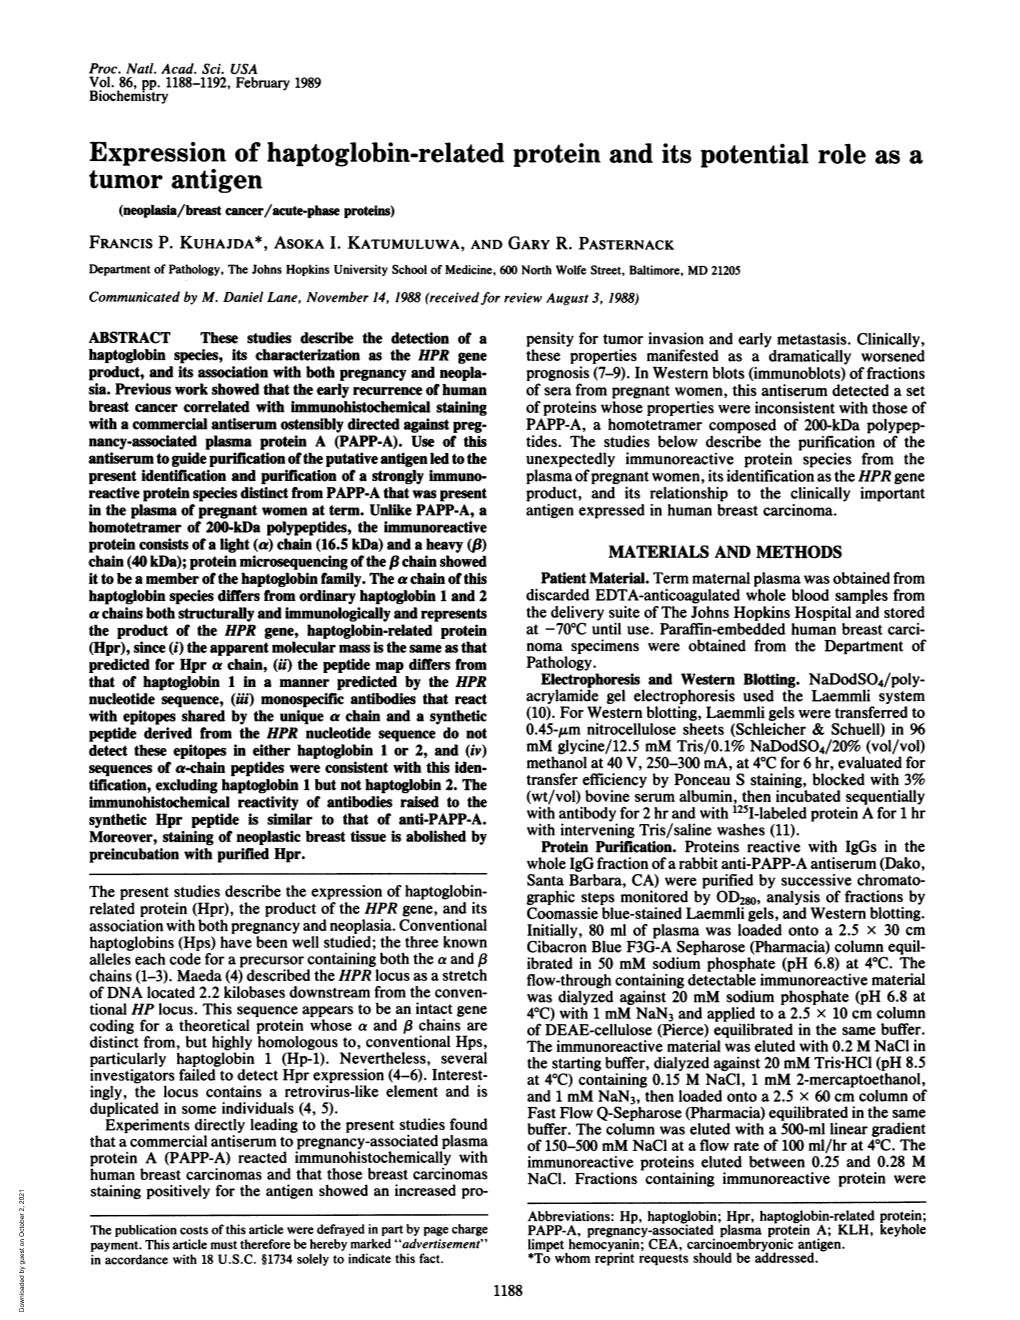 Expression of Haptoglobin-Related Protein and Its Potential Role As a Tumor Antigen (Neoplasia/Breast Cancer/Acute-Phase Proteins) FRANCIS P